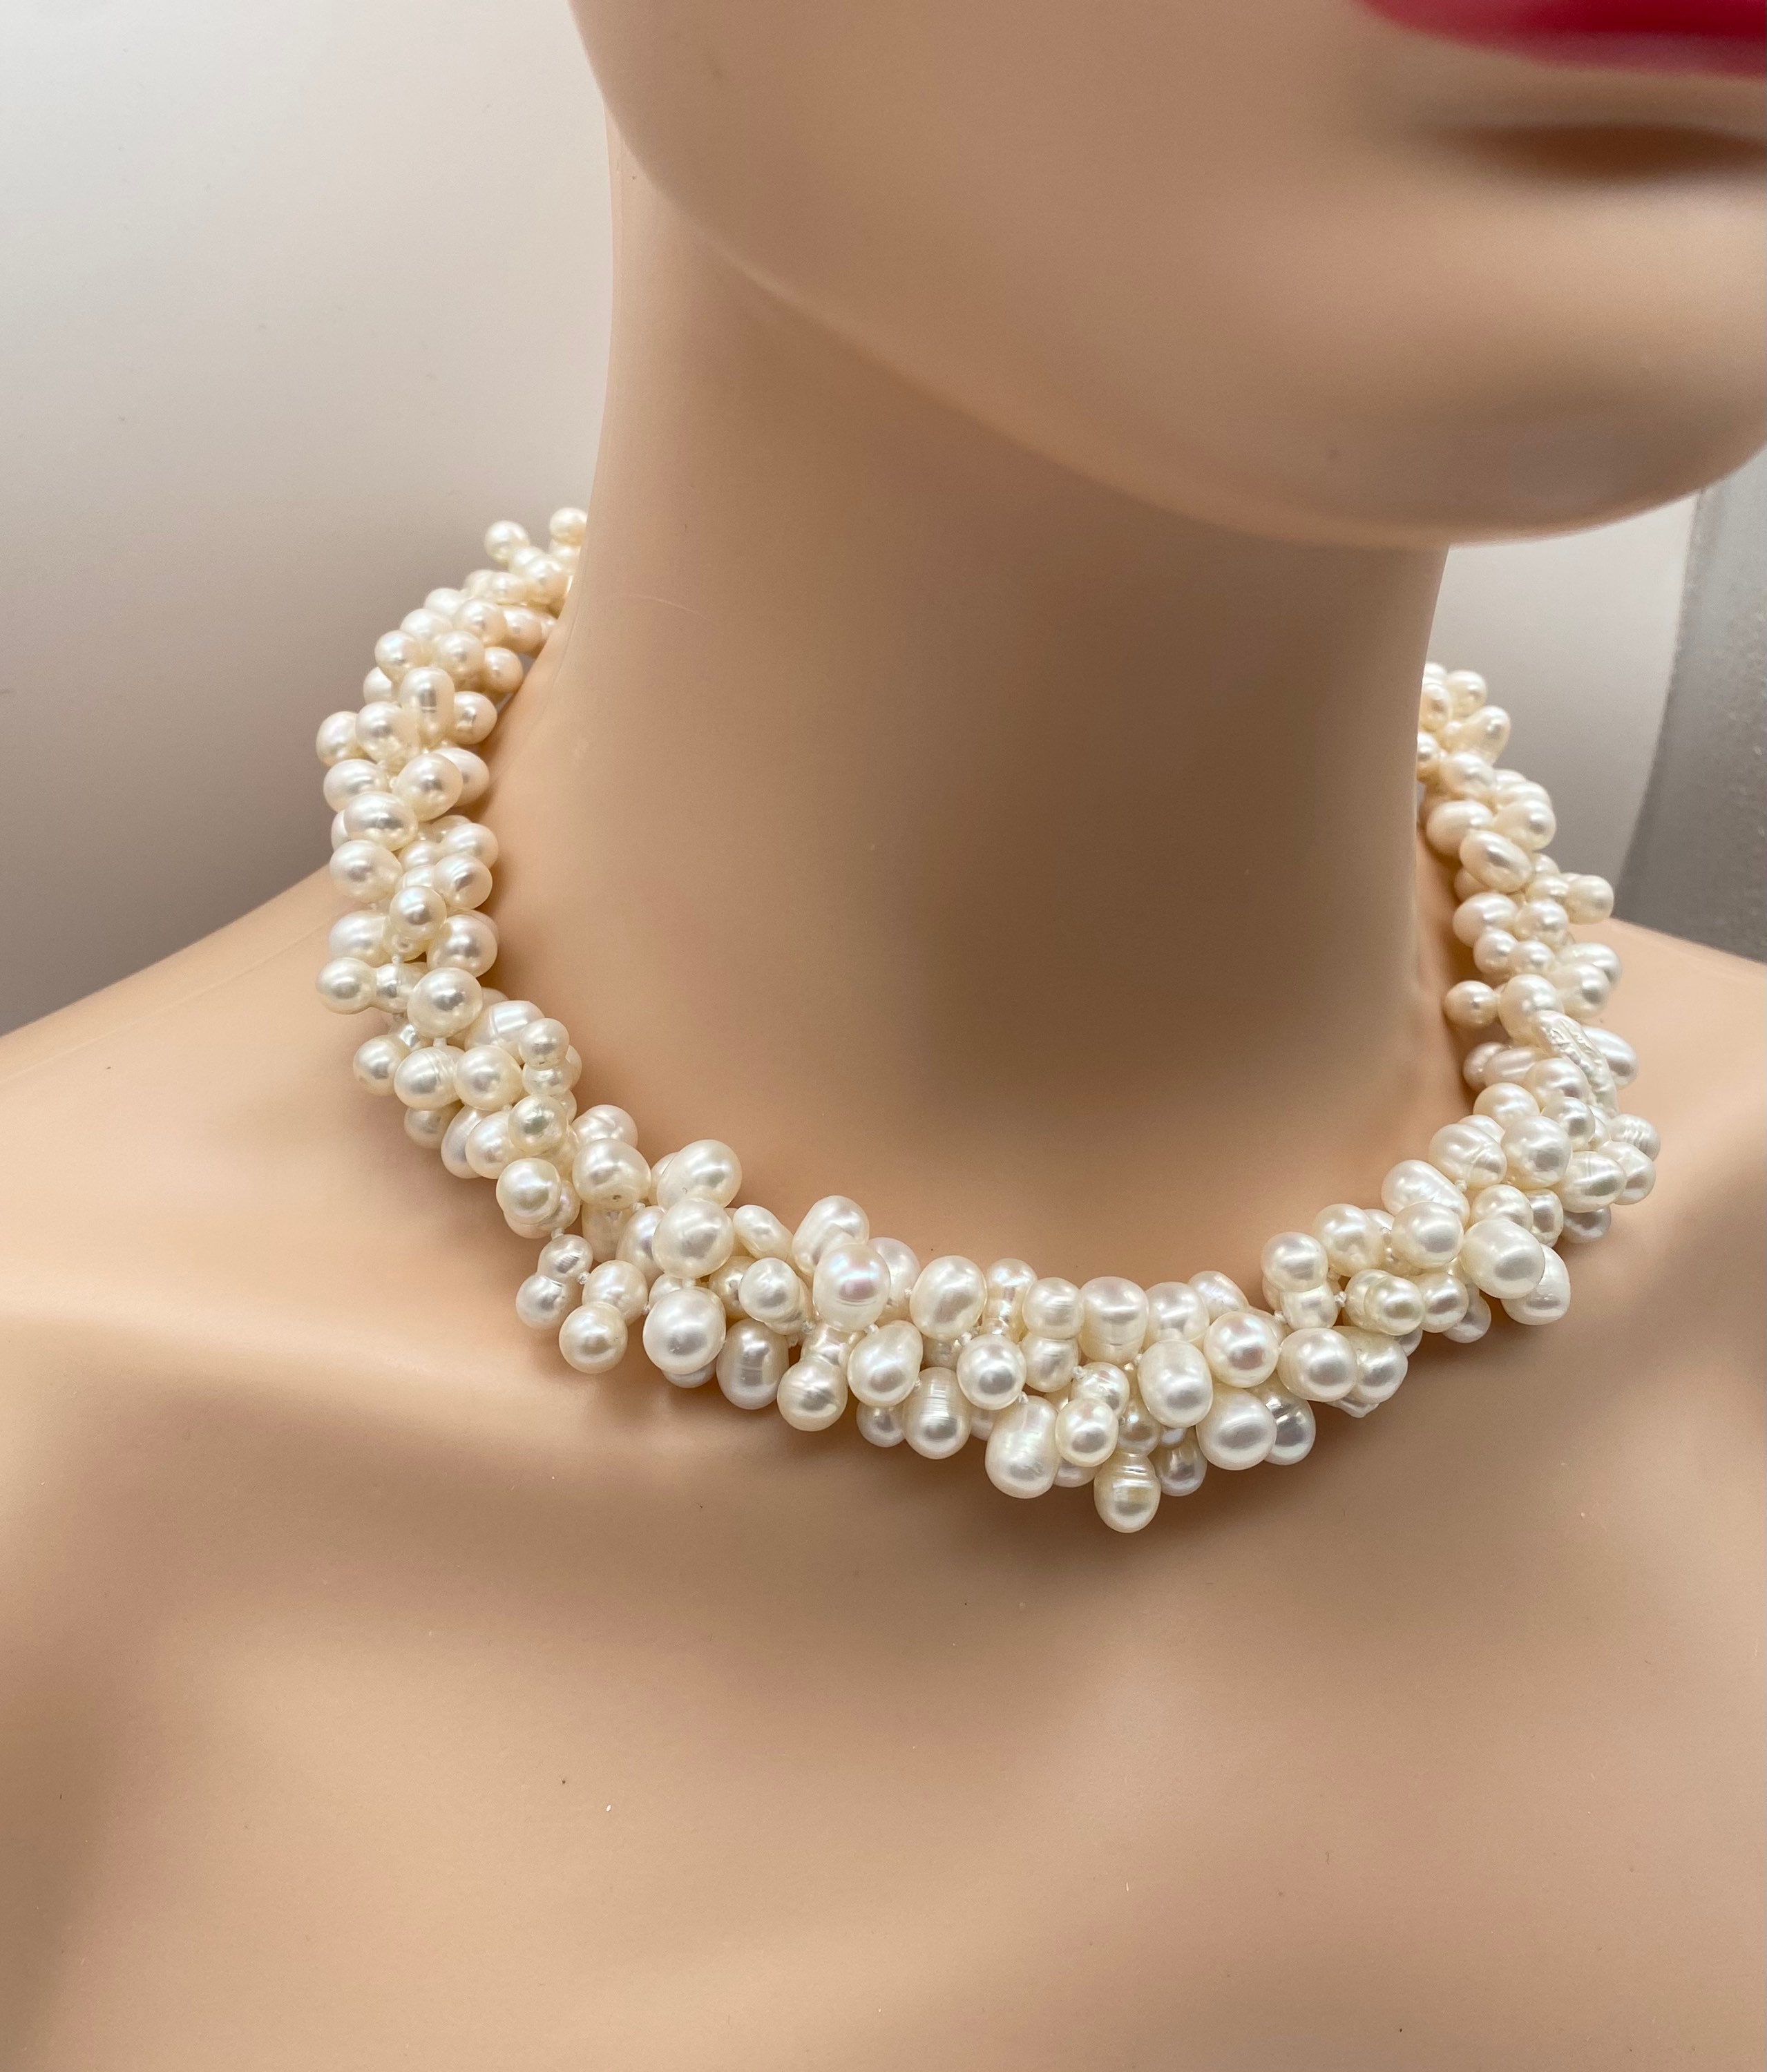 White Freshwater Pearl Necklace, Multistrand Bib on Silk Ribbon, Statement  Pearls, Wedding Fashion, Deluxe Pearls, Bridal Accessory